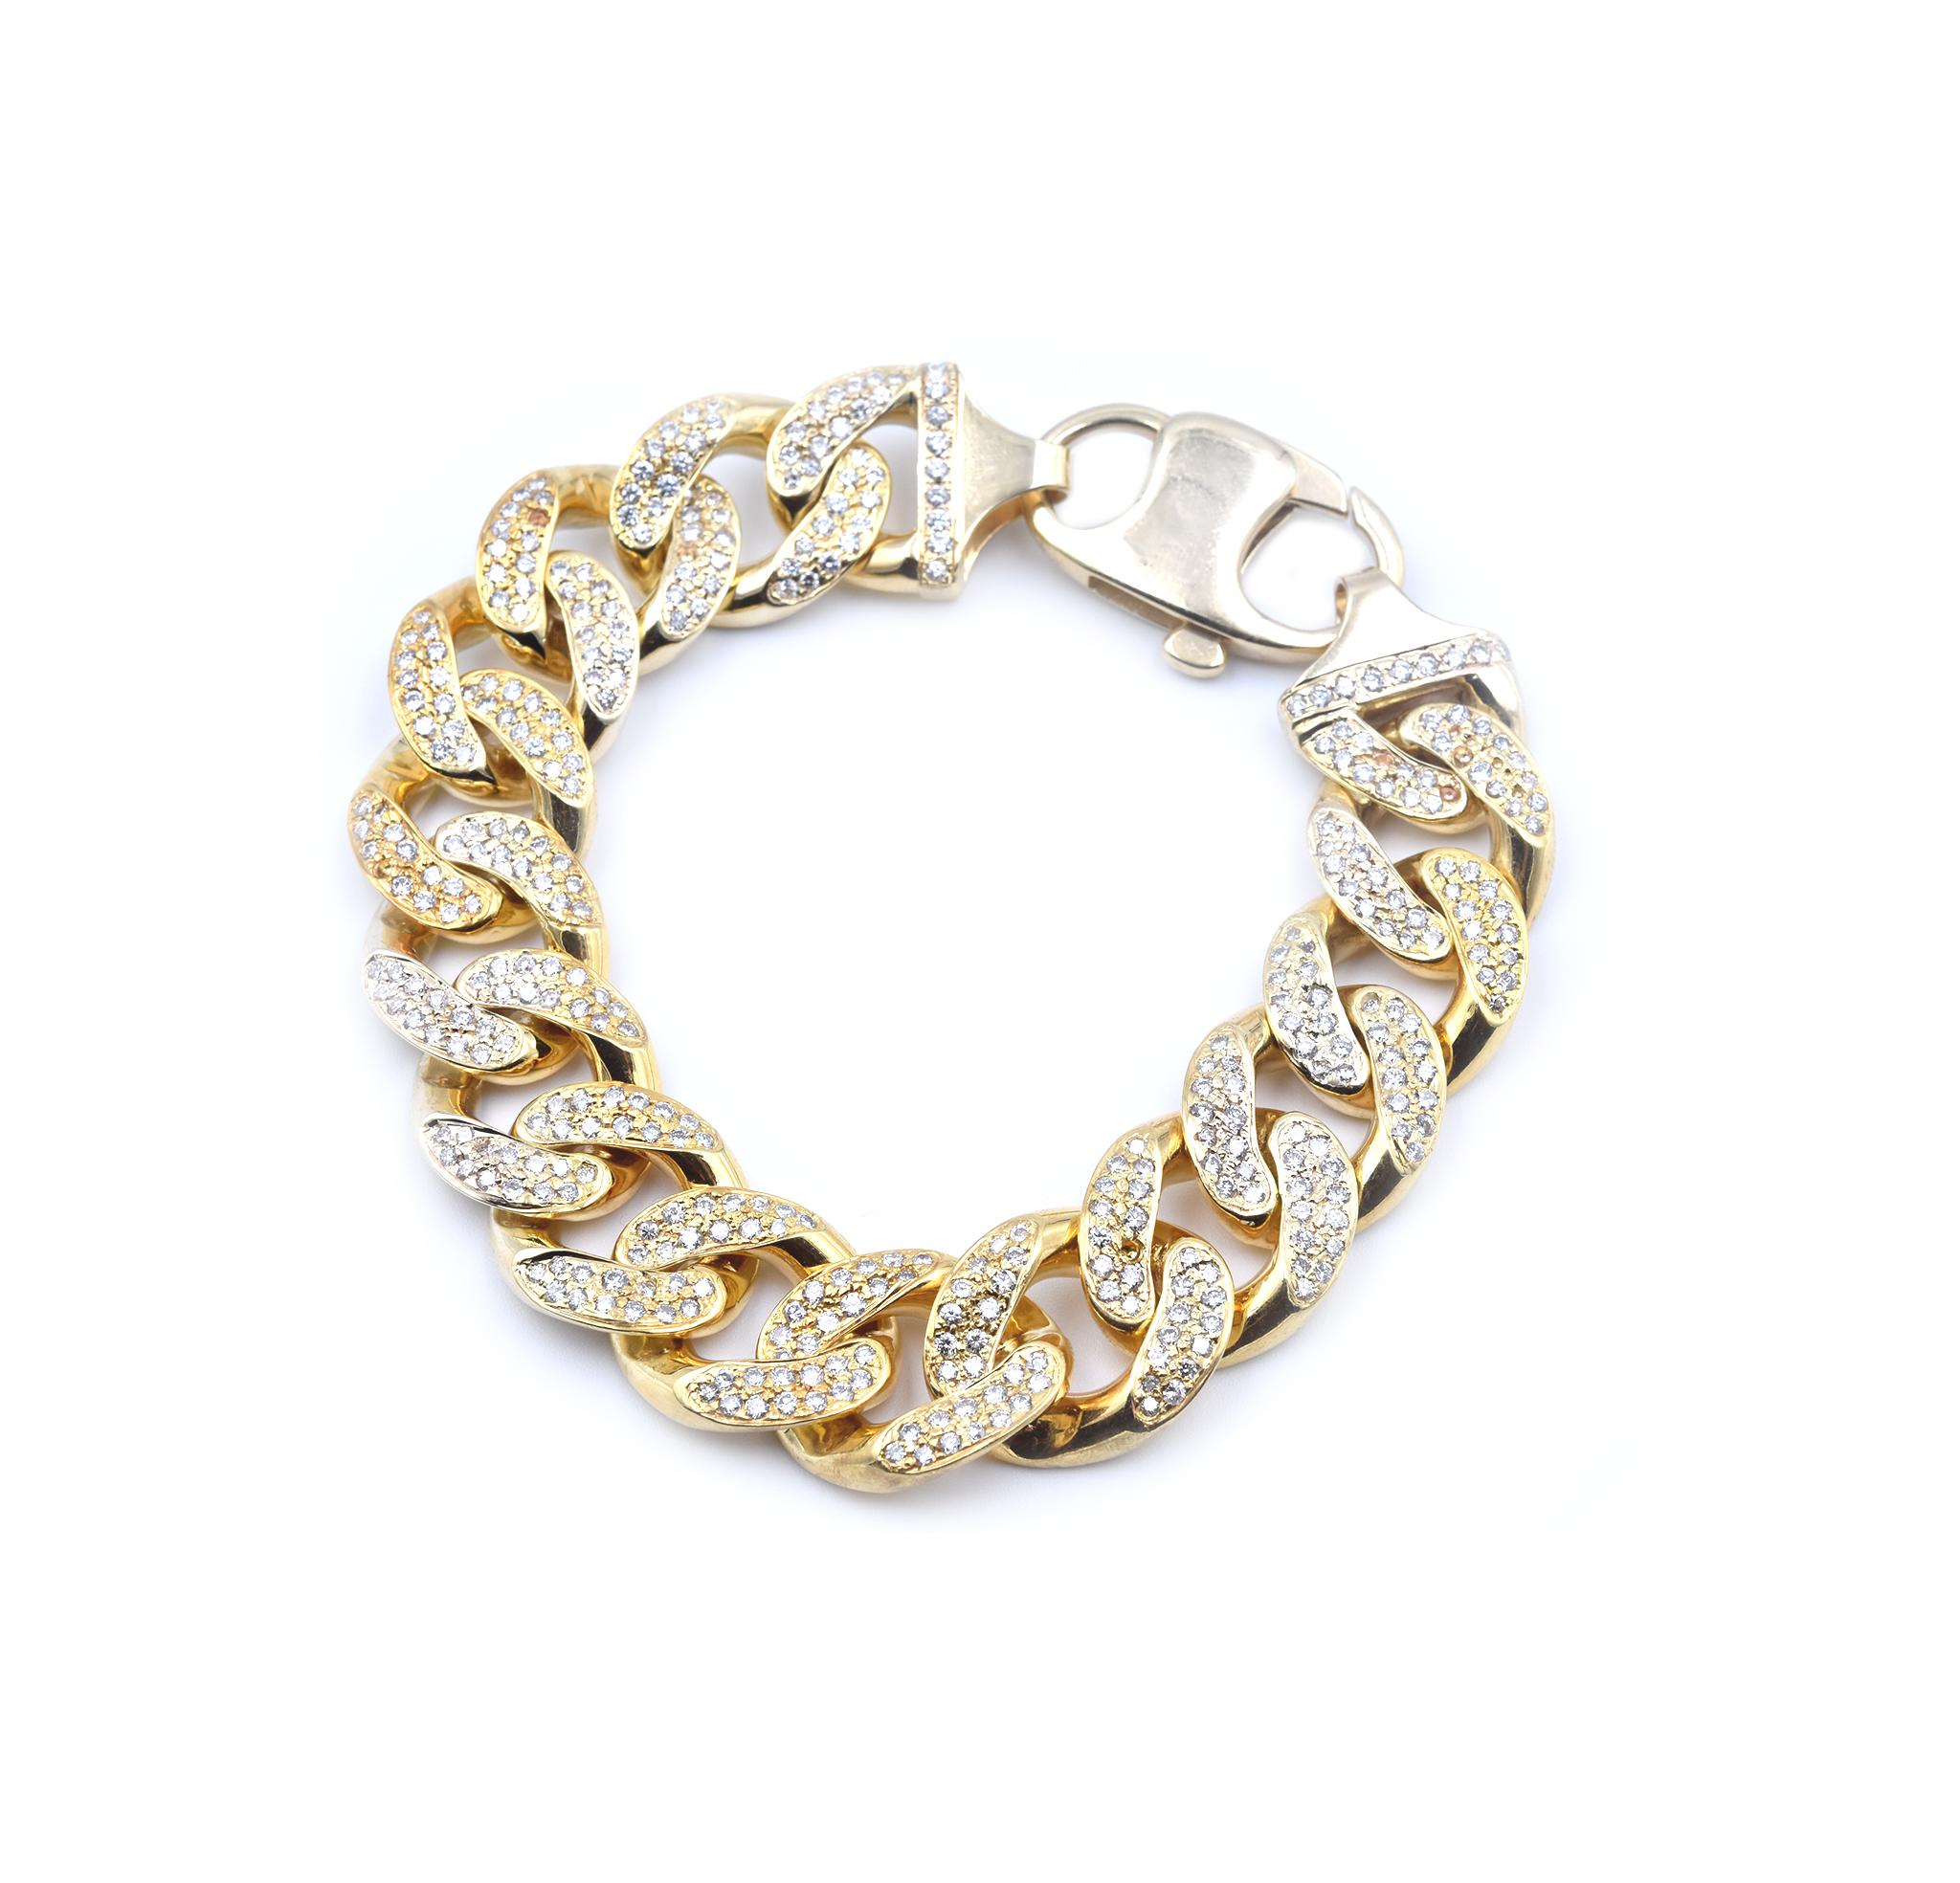 Designer: custom design
Material: 14k yellow gold
Diamonds: 350 round brilliant cut= 9.80cttw
Color: H
Clarity: SI
Dimensions: bracelet is 9 ¼-inches long and it is 18.54mm wide
Weight: 123.82 grams
